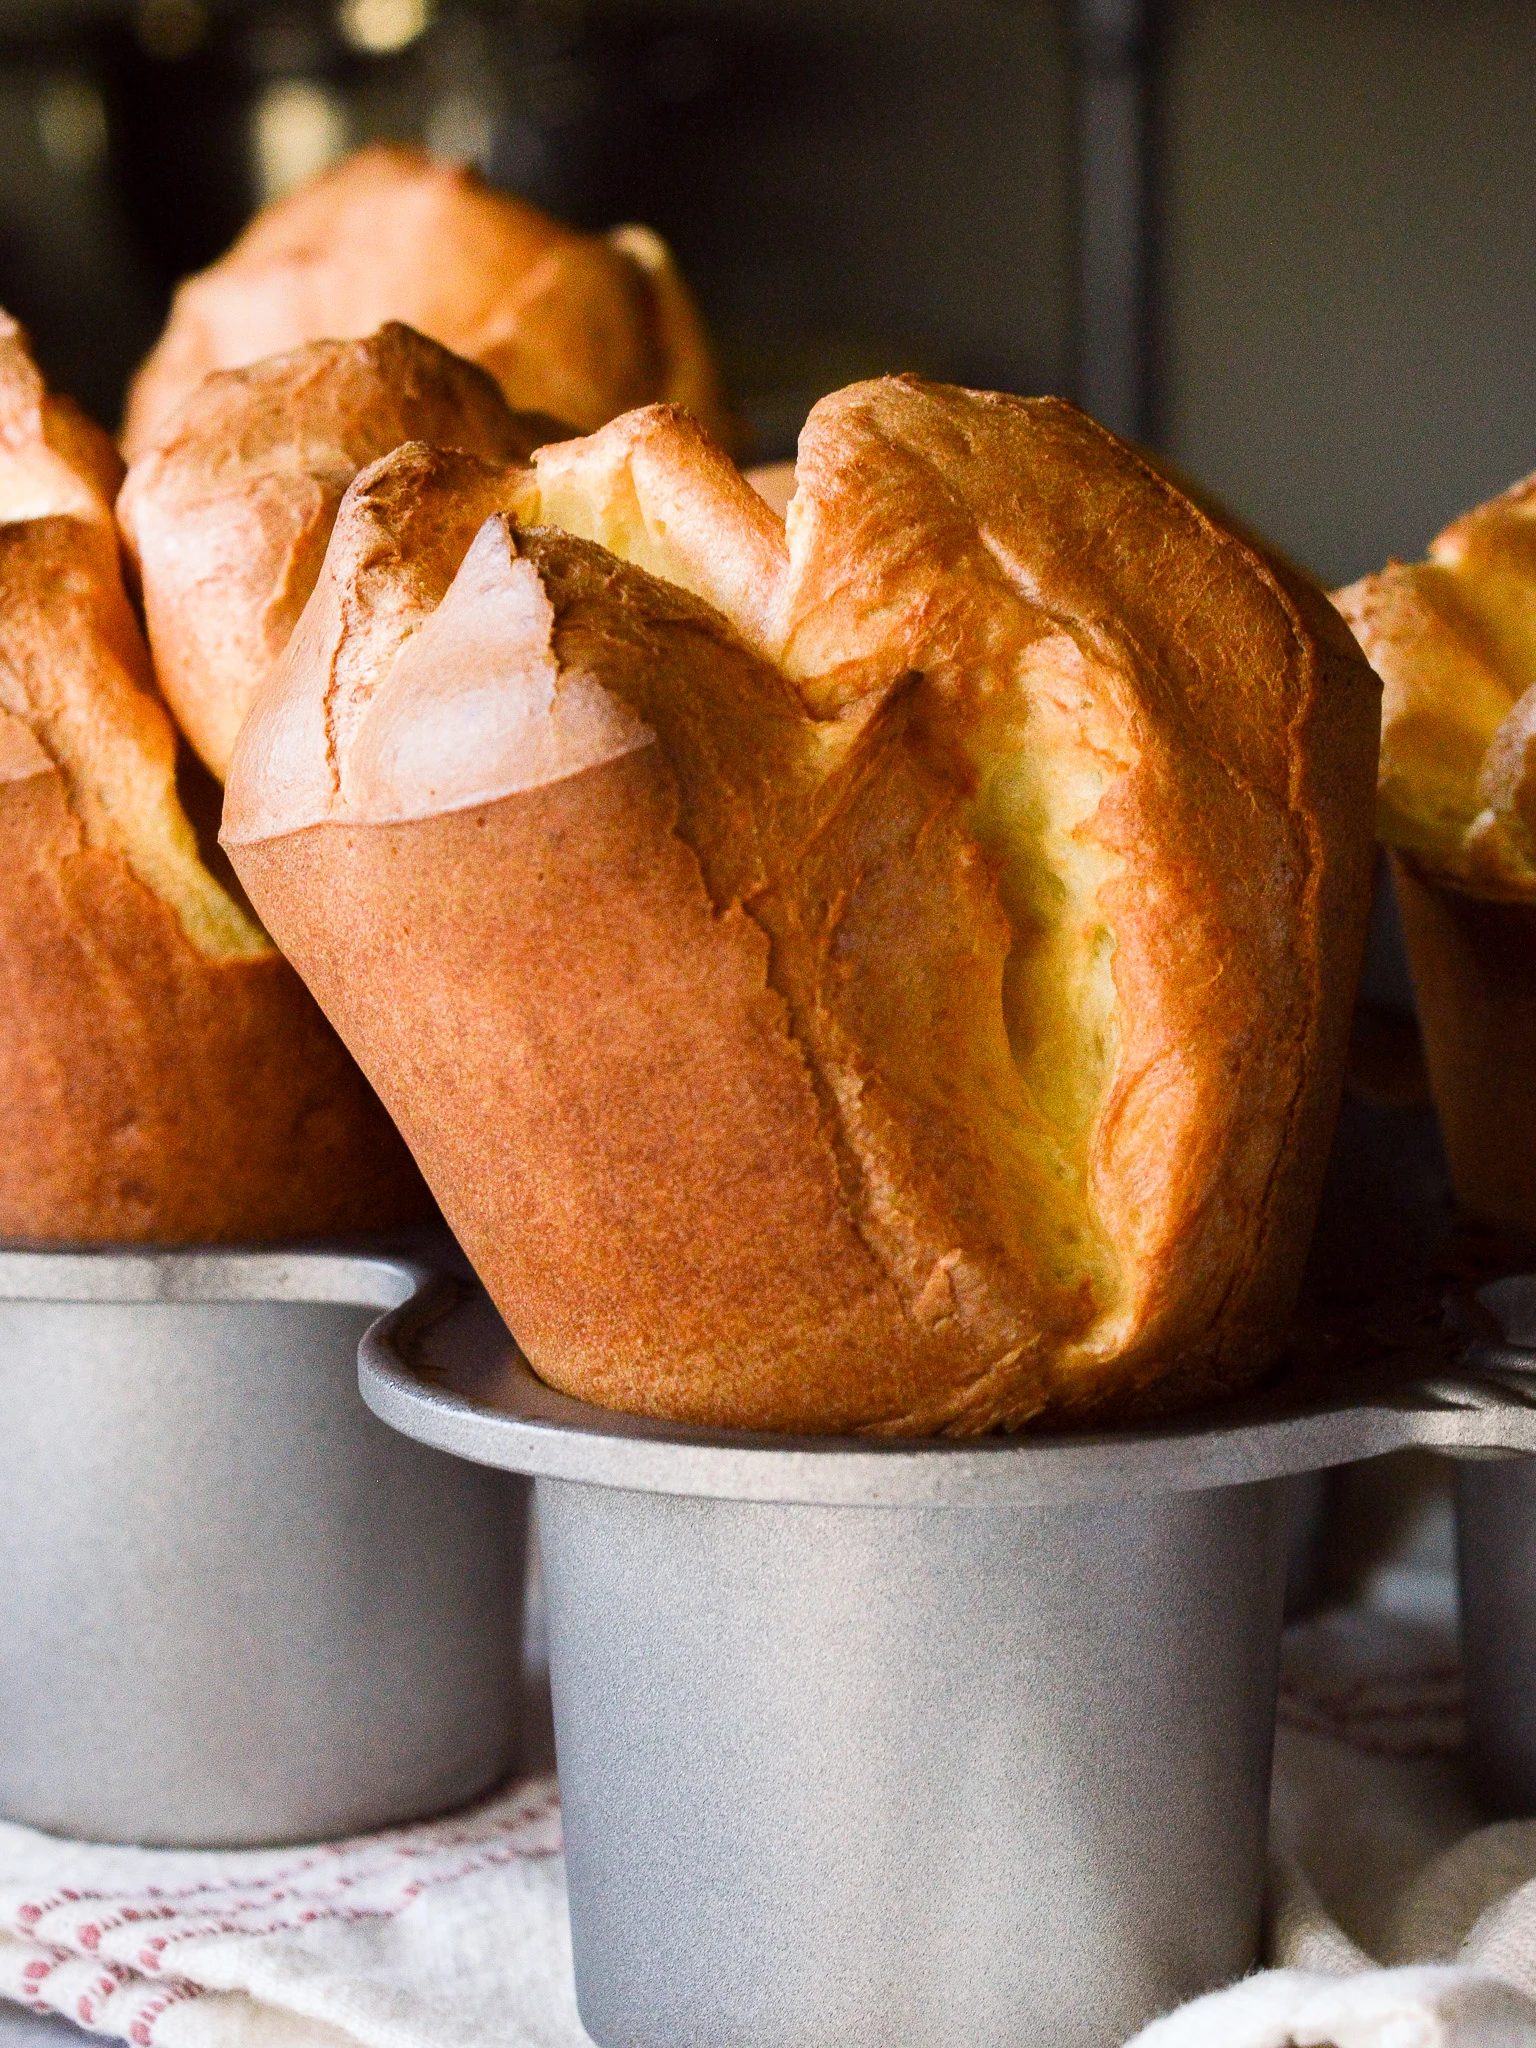 https://www.sugardishme.com/wp-content/uploads/2021/03/How-to-Make-Popovers-with-a-Blender.jpg.webp